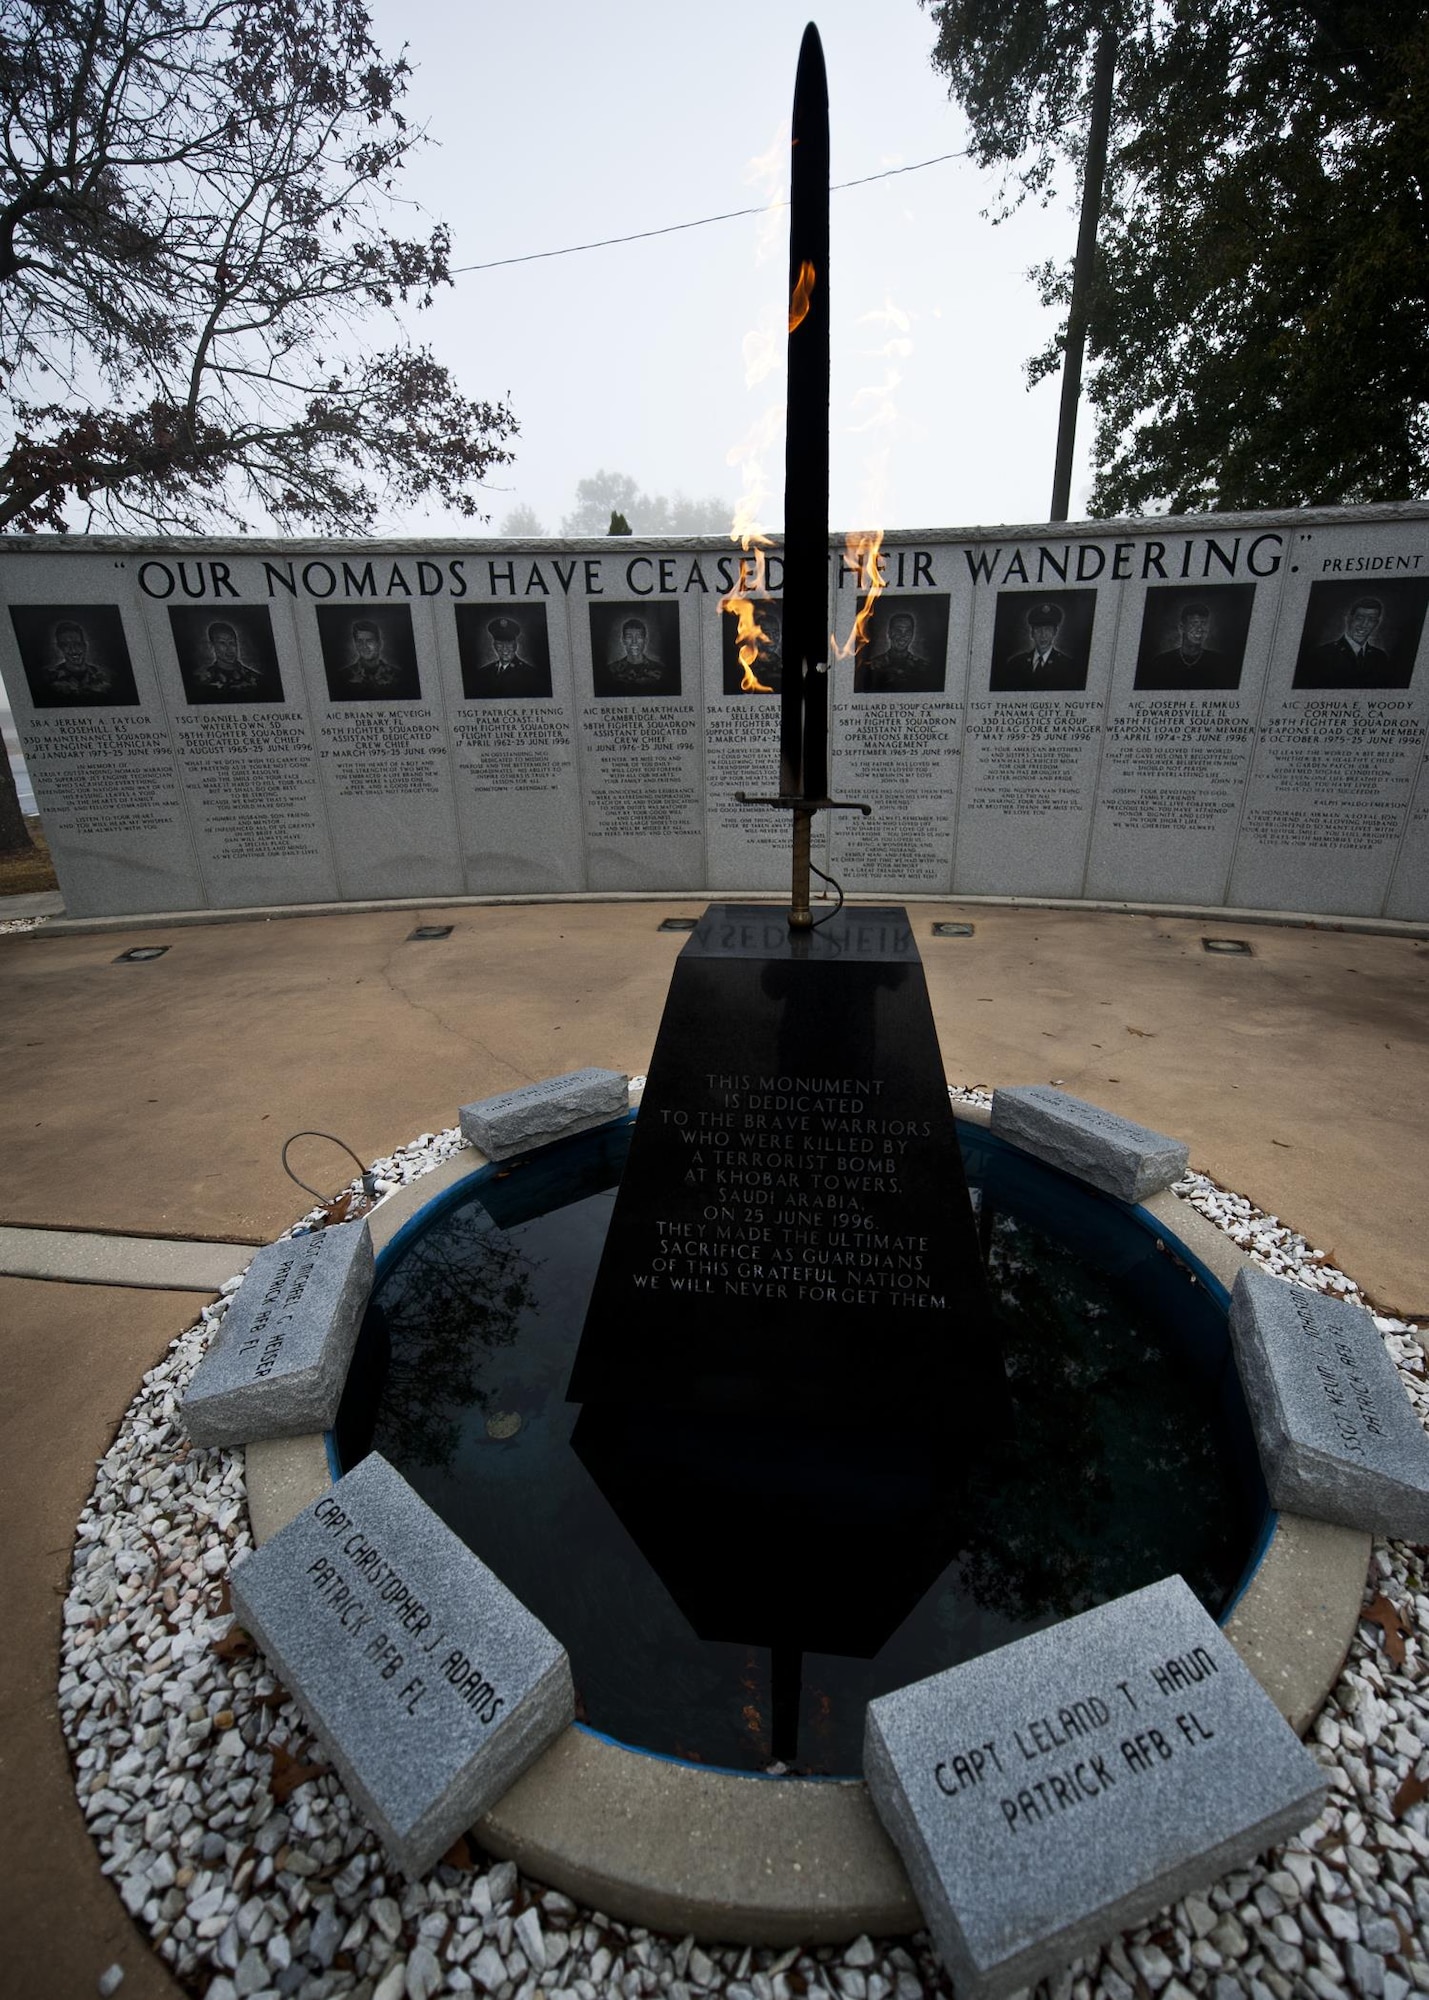 The fiery sword at the center of the Nomad Memorial burns bright through the foggy morning Feb. 18, 2011, at Eglin Air Force Base, Fla. The memorial was constructed to honor the hundreds of wounded personnel and 19 Airmen who lost their lives during the Khobar Towers bombing on June 25, 1996. (U.S. Air Force photo/Samuel King Jr.)